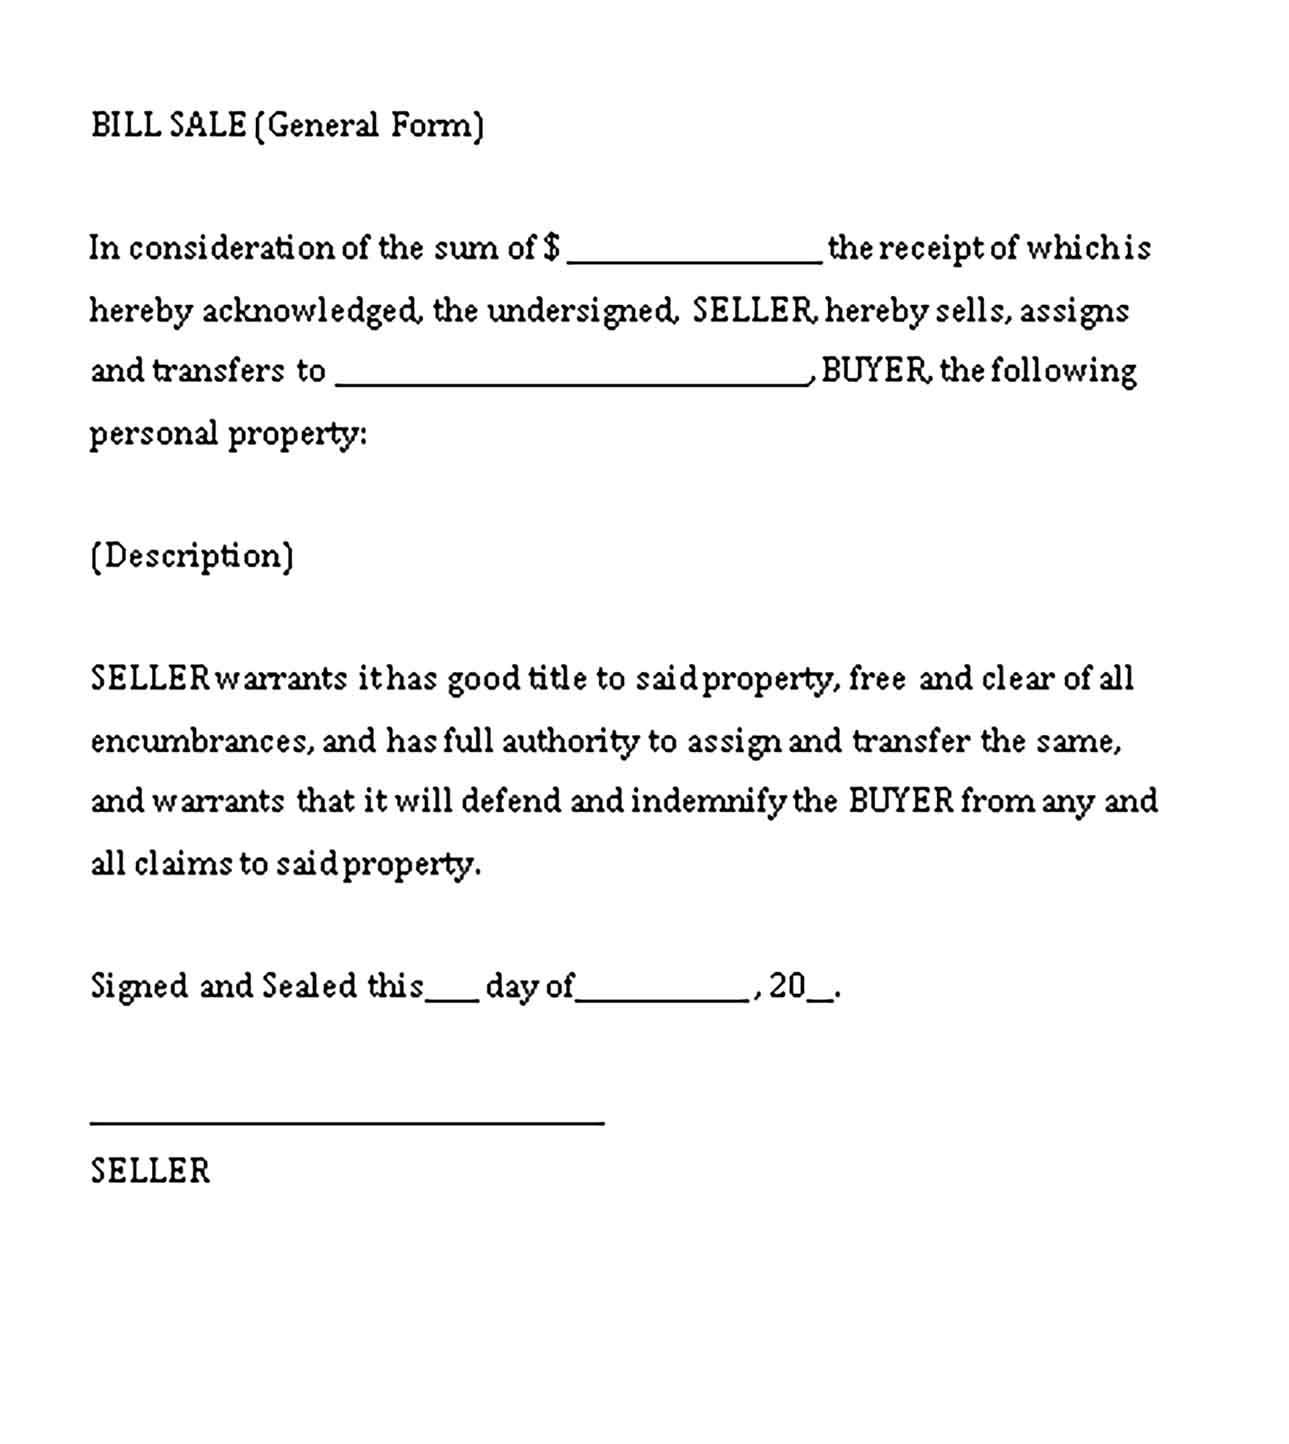 Sample general bill of sale word Templates